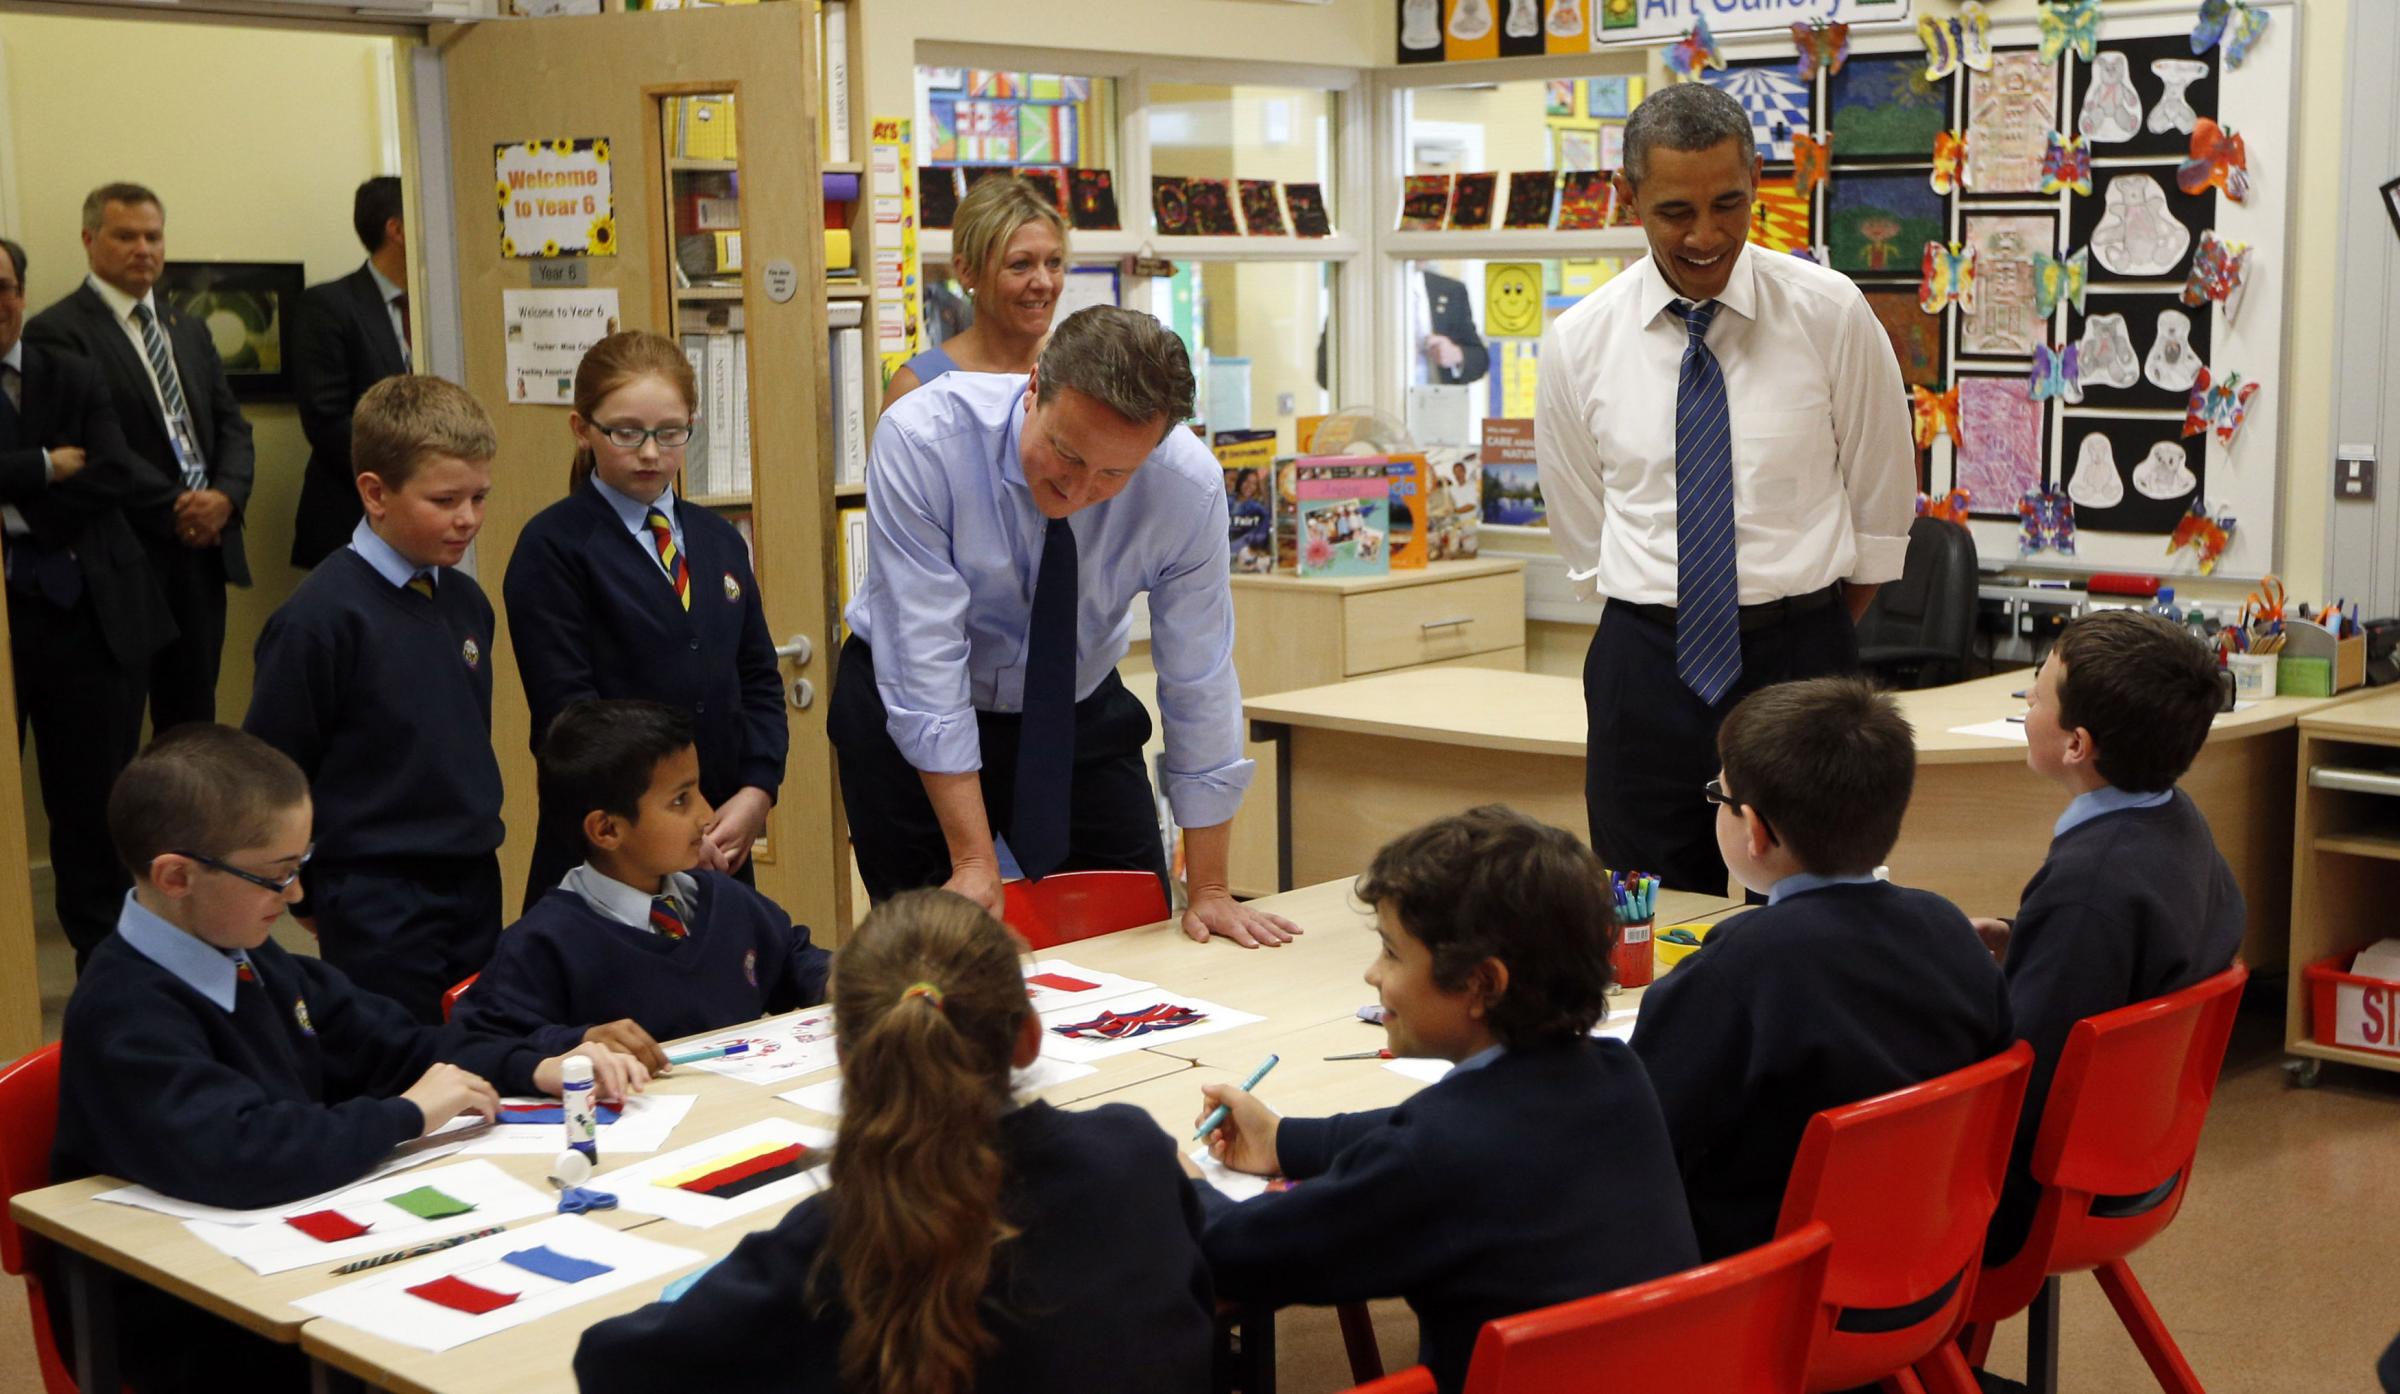 President Barack Obama and Prime Minister David Cameron watch as students work on a school project about the G8 summit during a visit to the Enniskillen Integrated Primary School in Enniskillen, Northern Ireland ahead of the G8 summit.